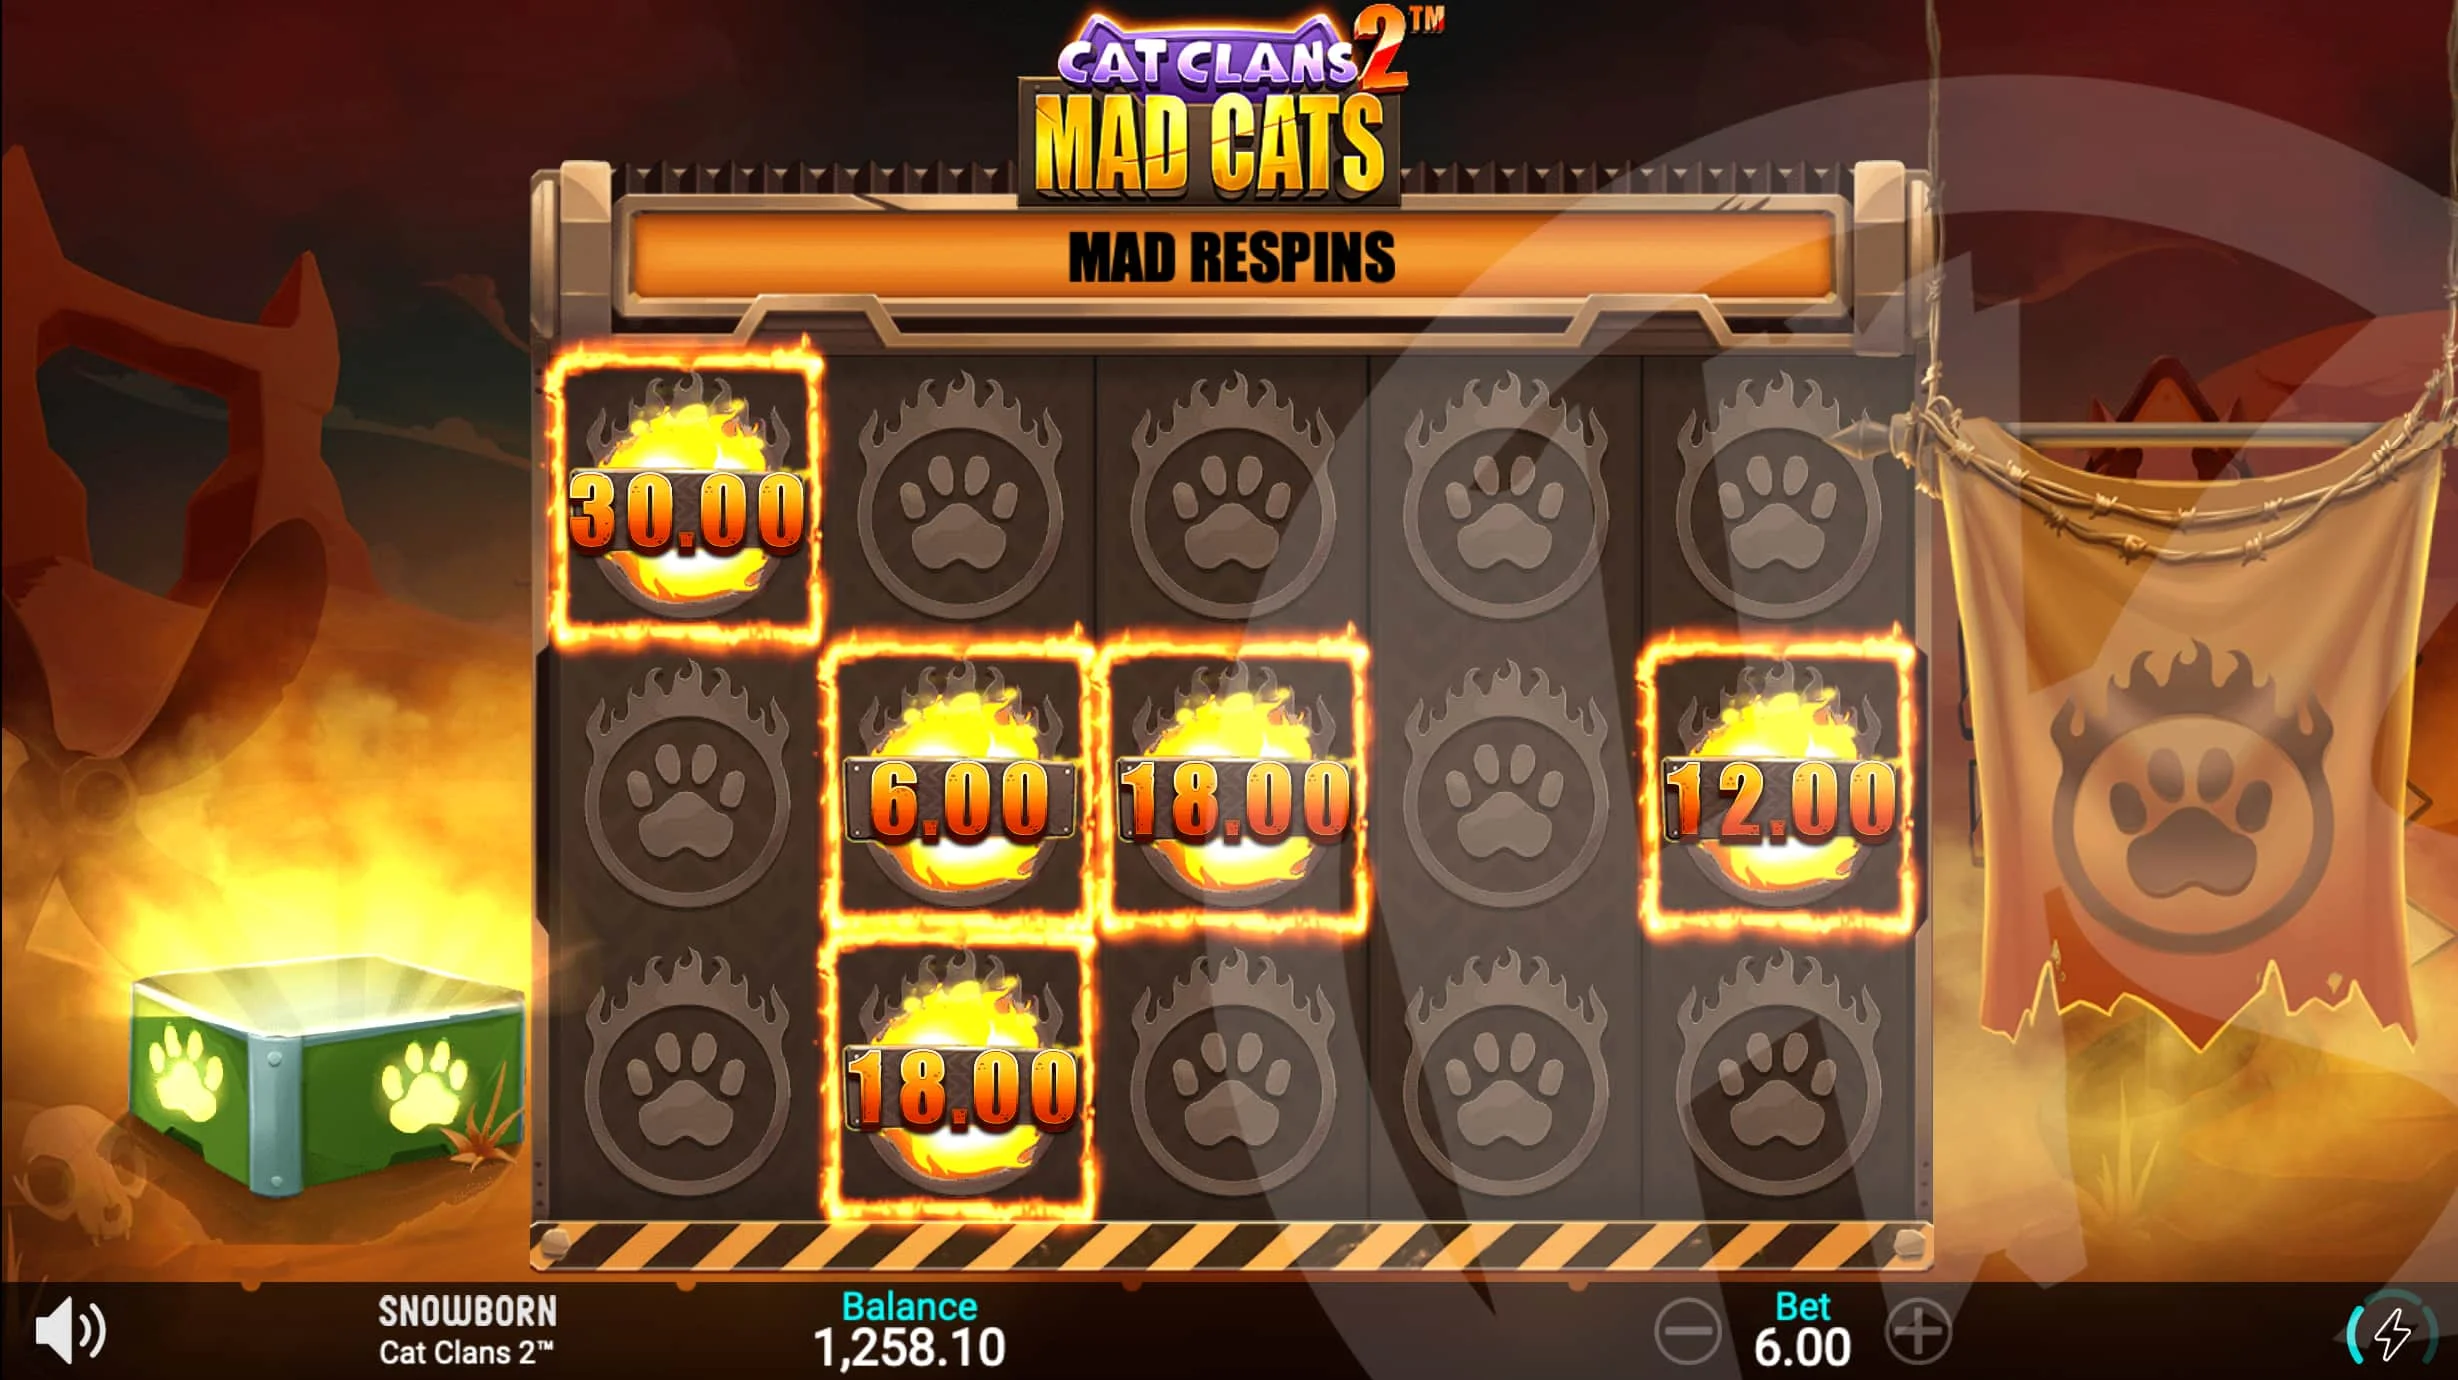 Cat Clans 2 Mad Cats Mad Respins